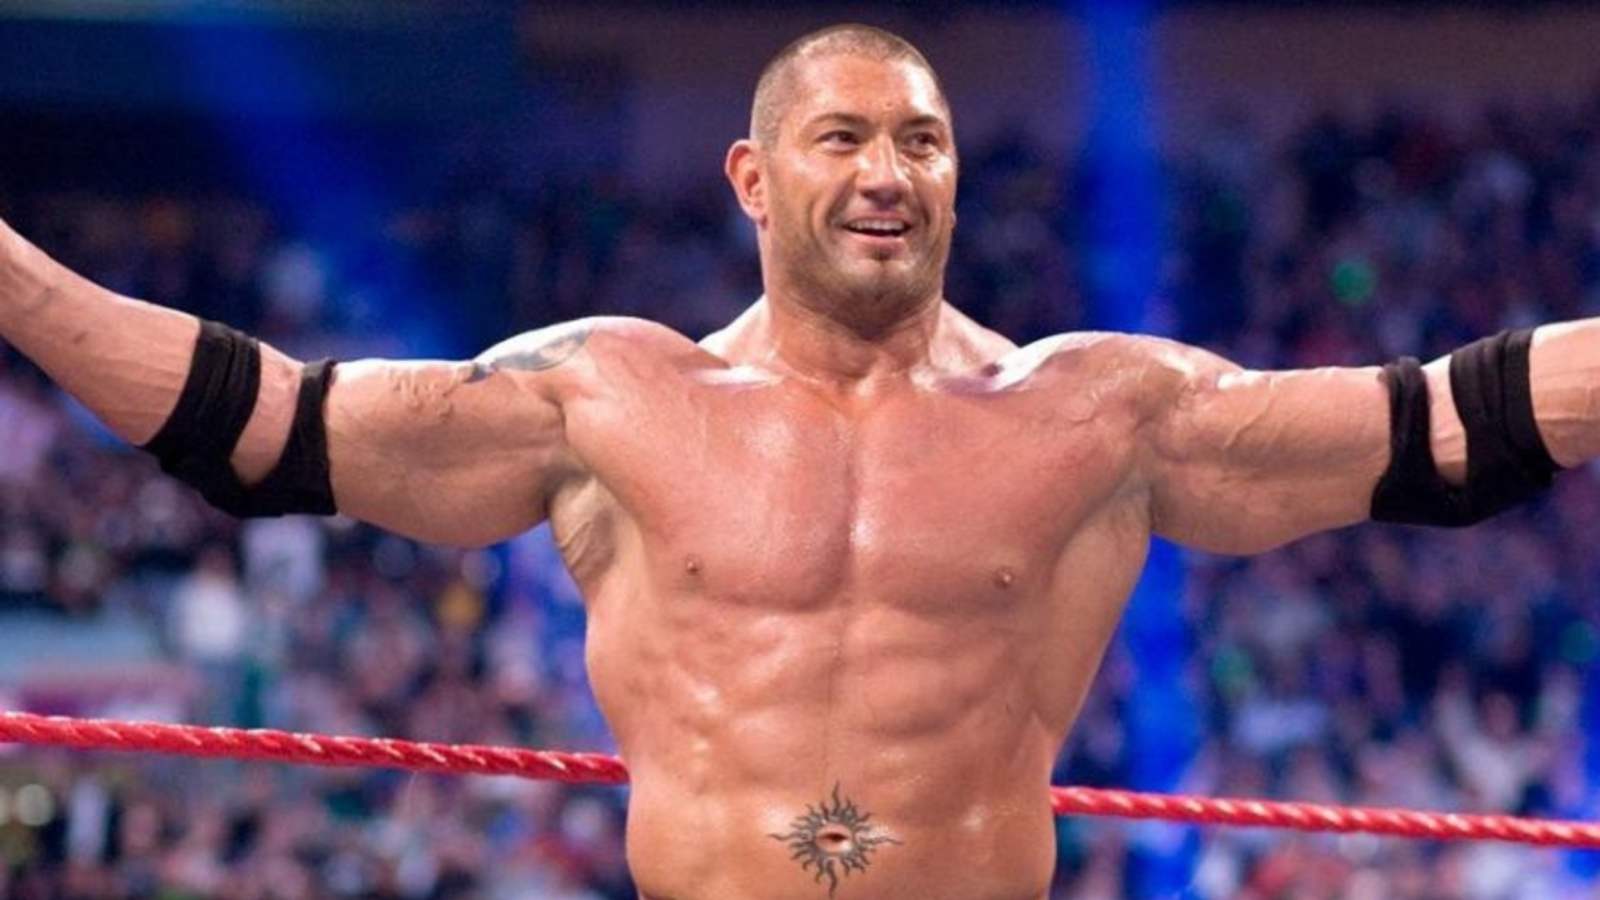 Dave Bautista and Jeff Bridges to Co-Star in “Grendel”